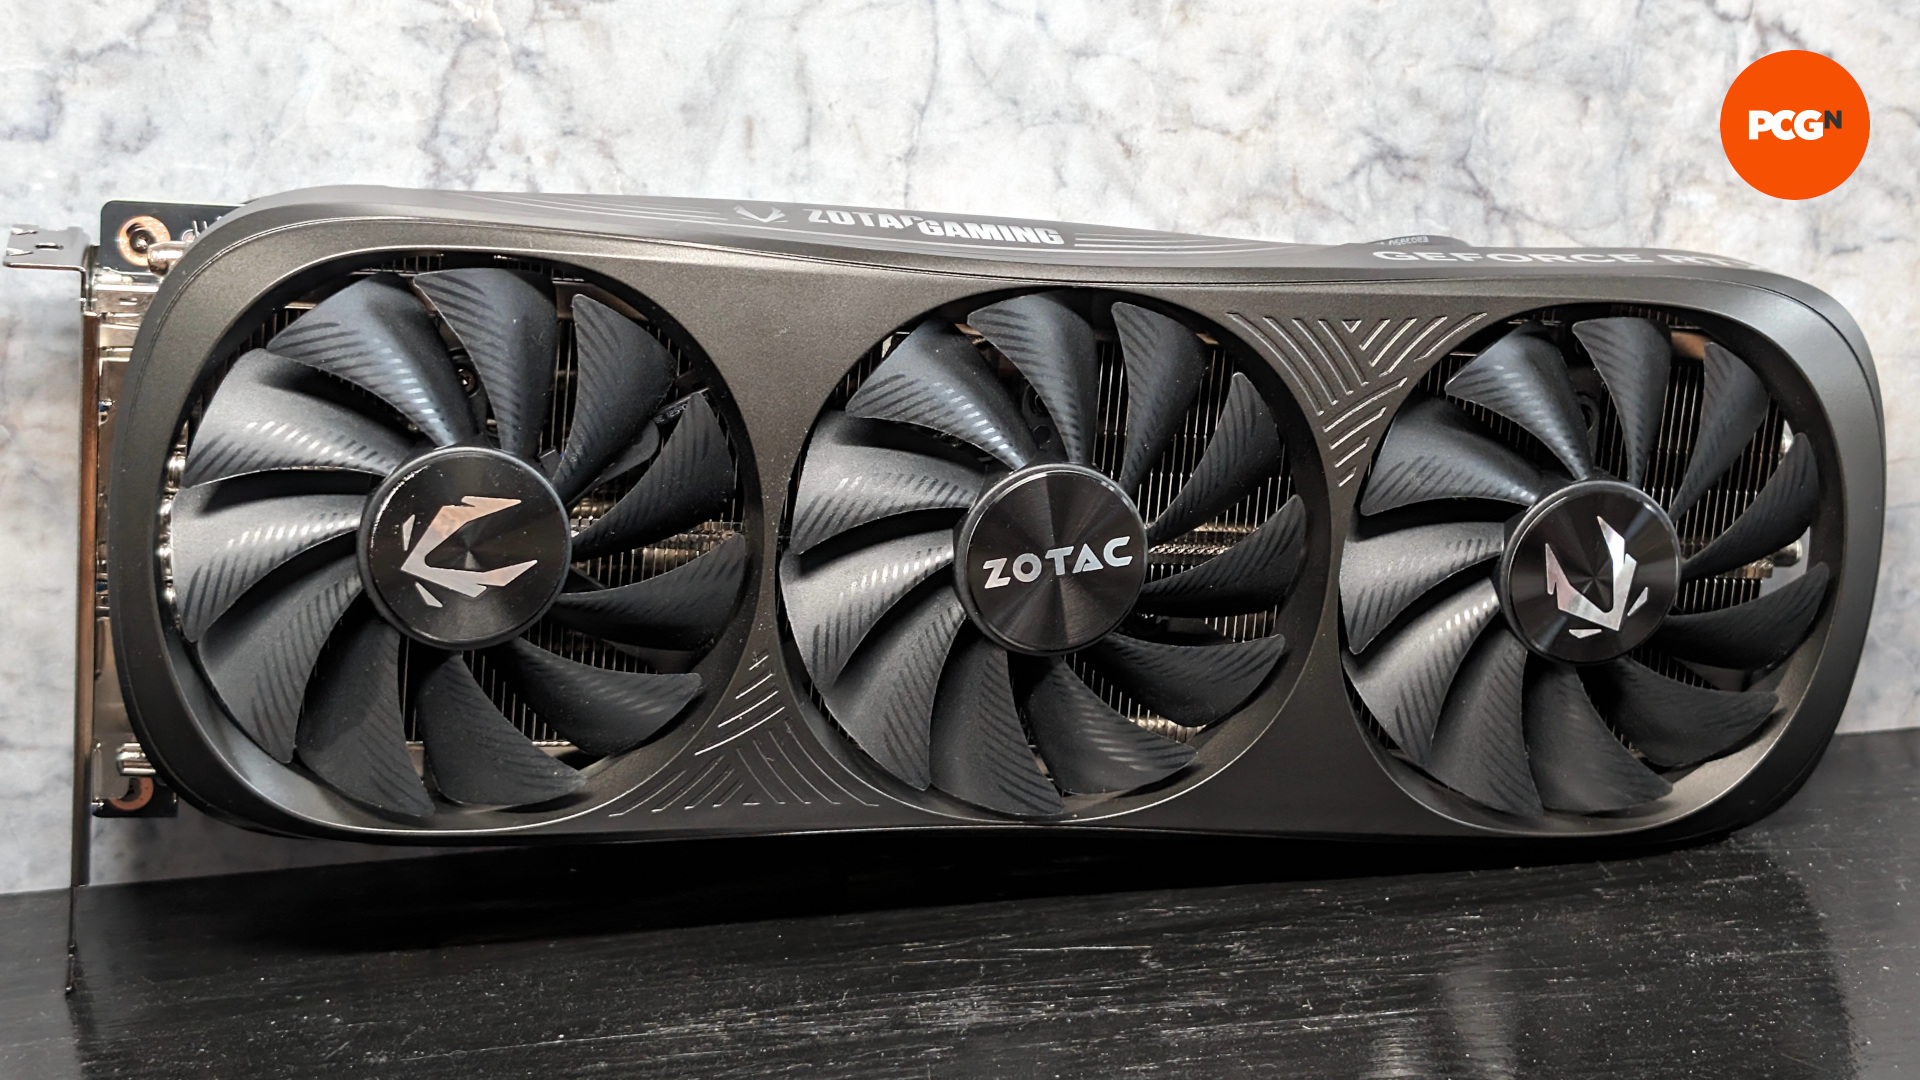 The Nvidia GeForce RTX 4070 Ti Super graphics card against a porcelain background